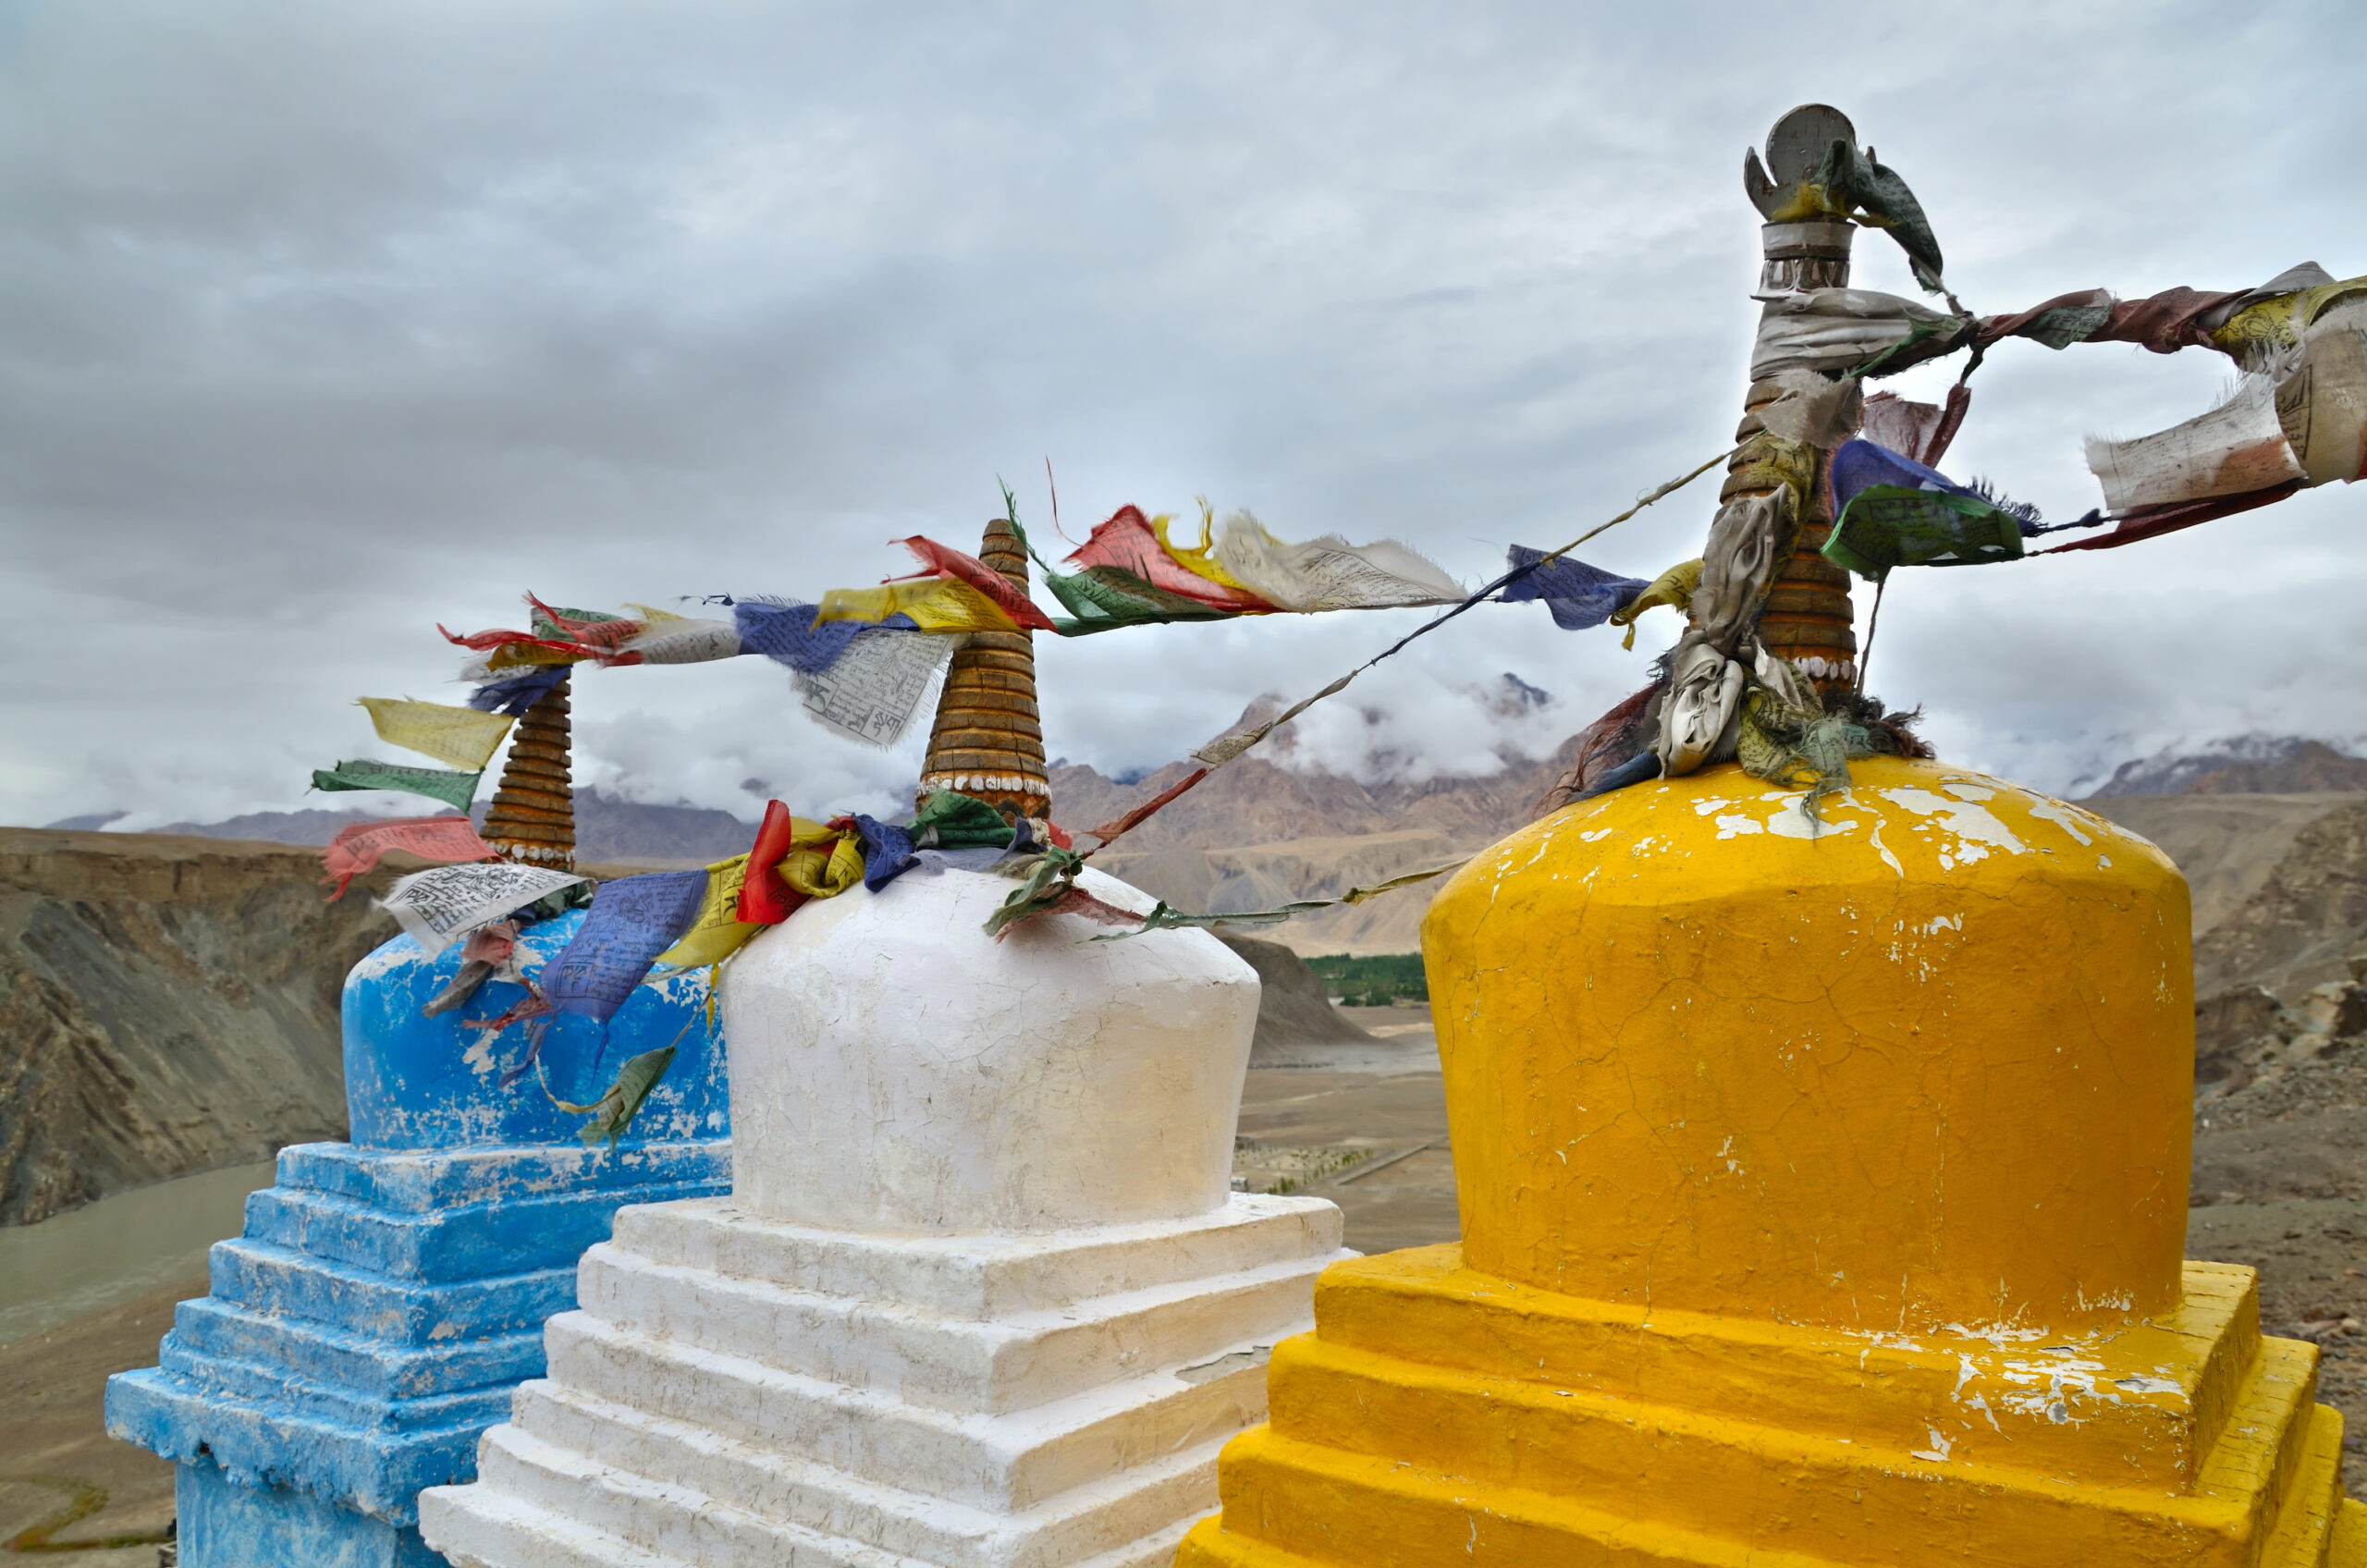 Buddhist chortens (stupas) with tibetan prayer flags near the confluence of the Indus and Zanskar rivers and Himalayas mountains on the background, Ladakh, India